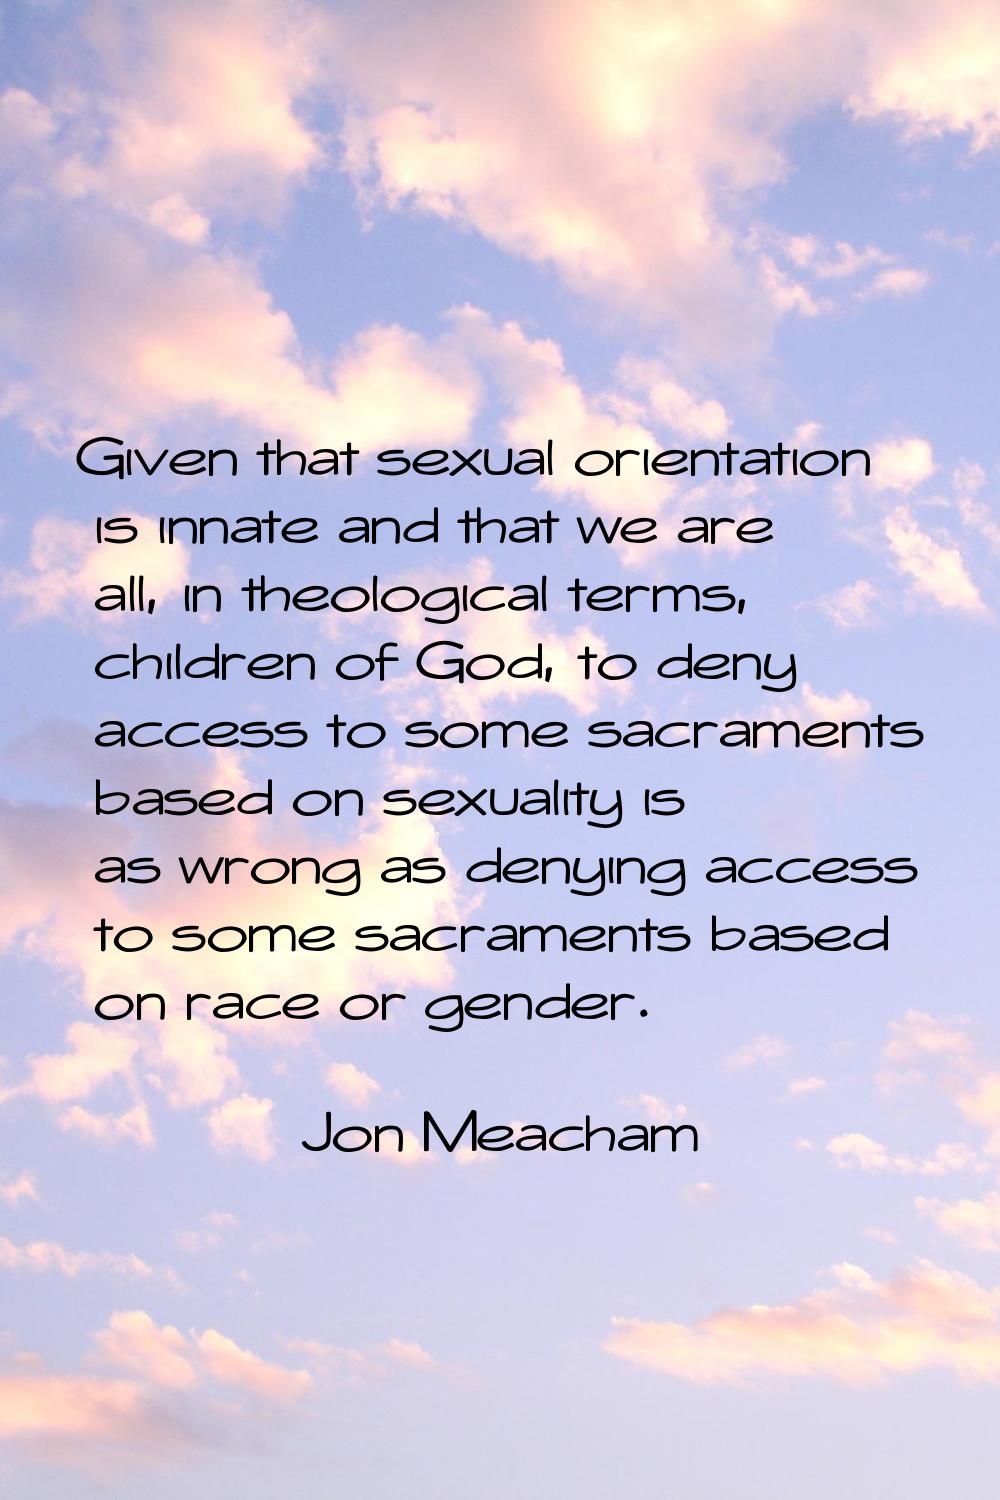 Given that sexual orientation is innate and that we are all, in theological terms, children of God,